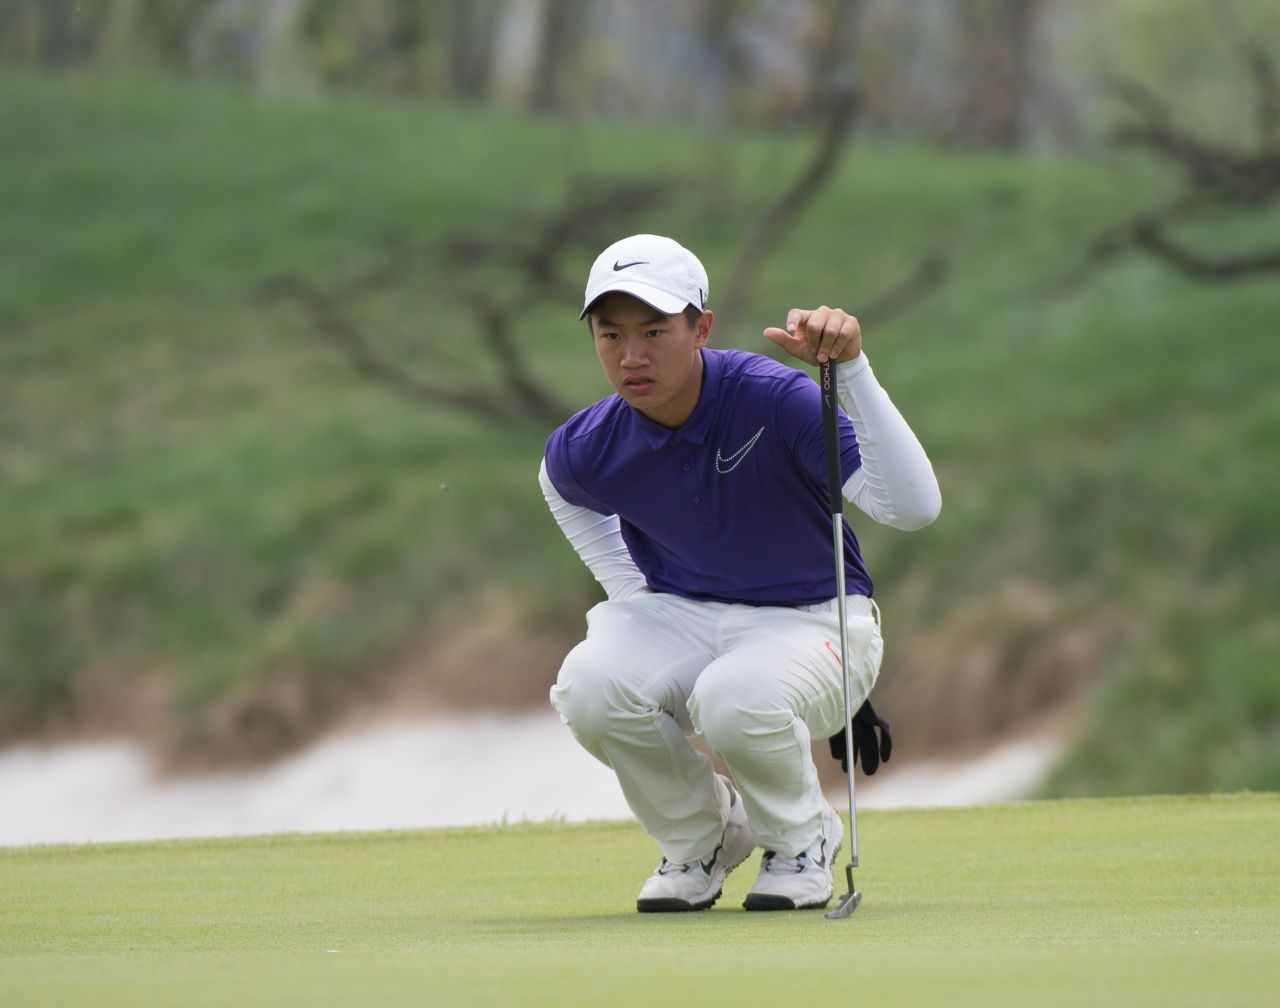 Ye Wocheng made European Tour history when he teed up at the 2013 China Open aged 12 years and 242 days, having come through a regional qualifying event.